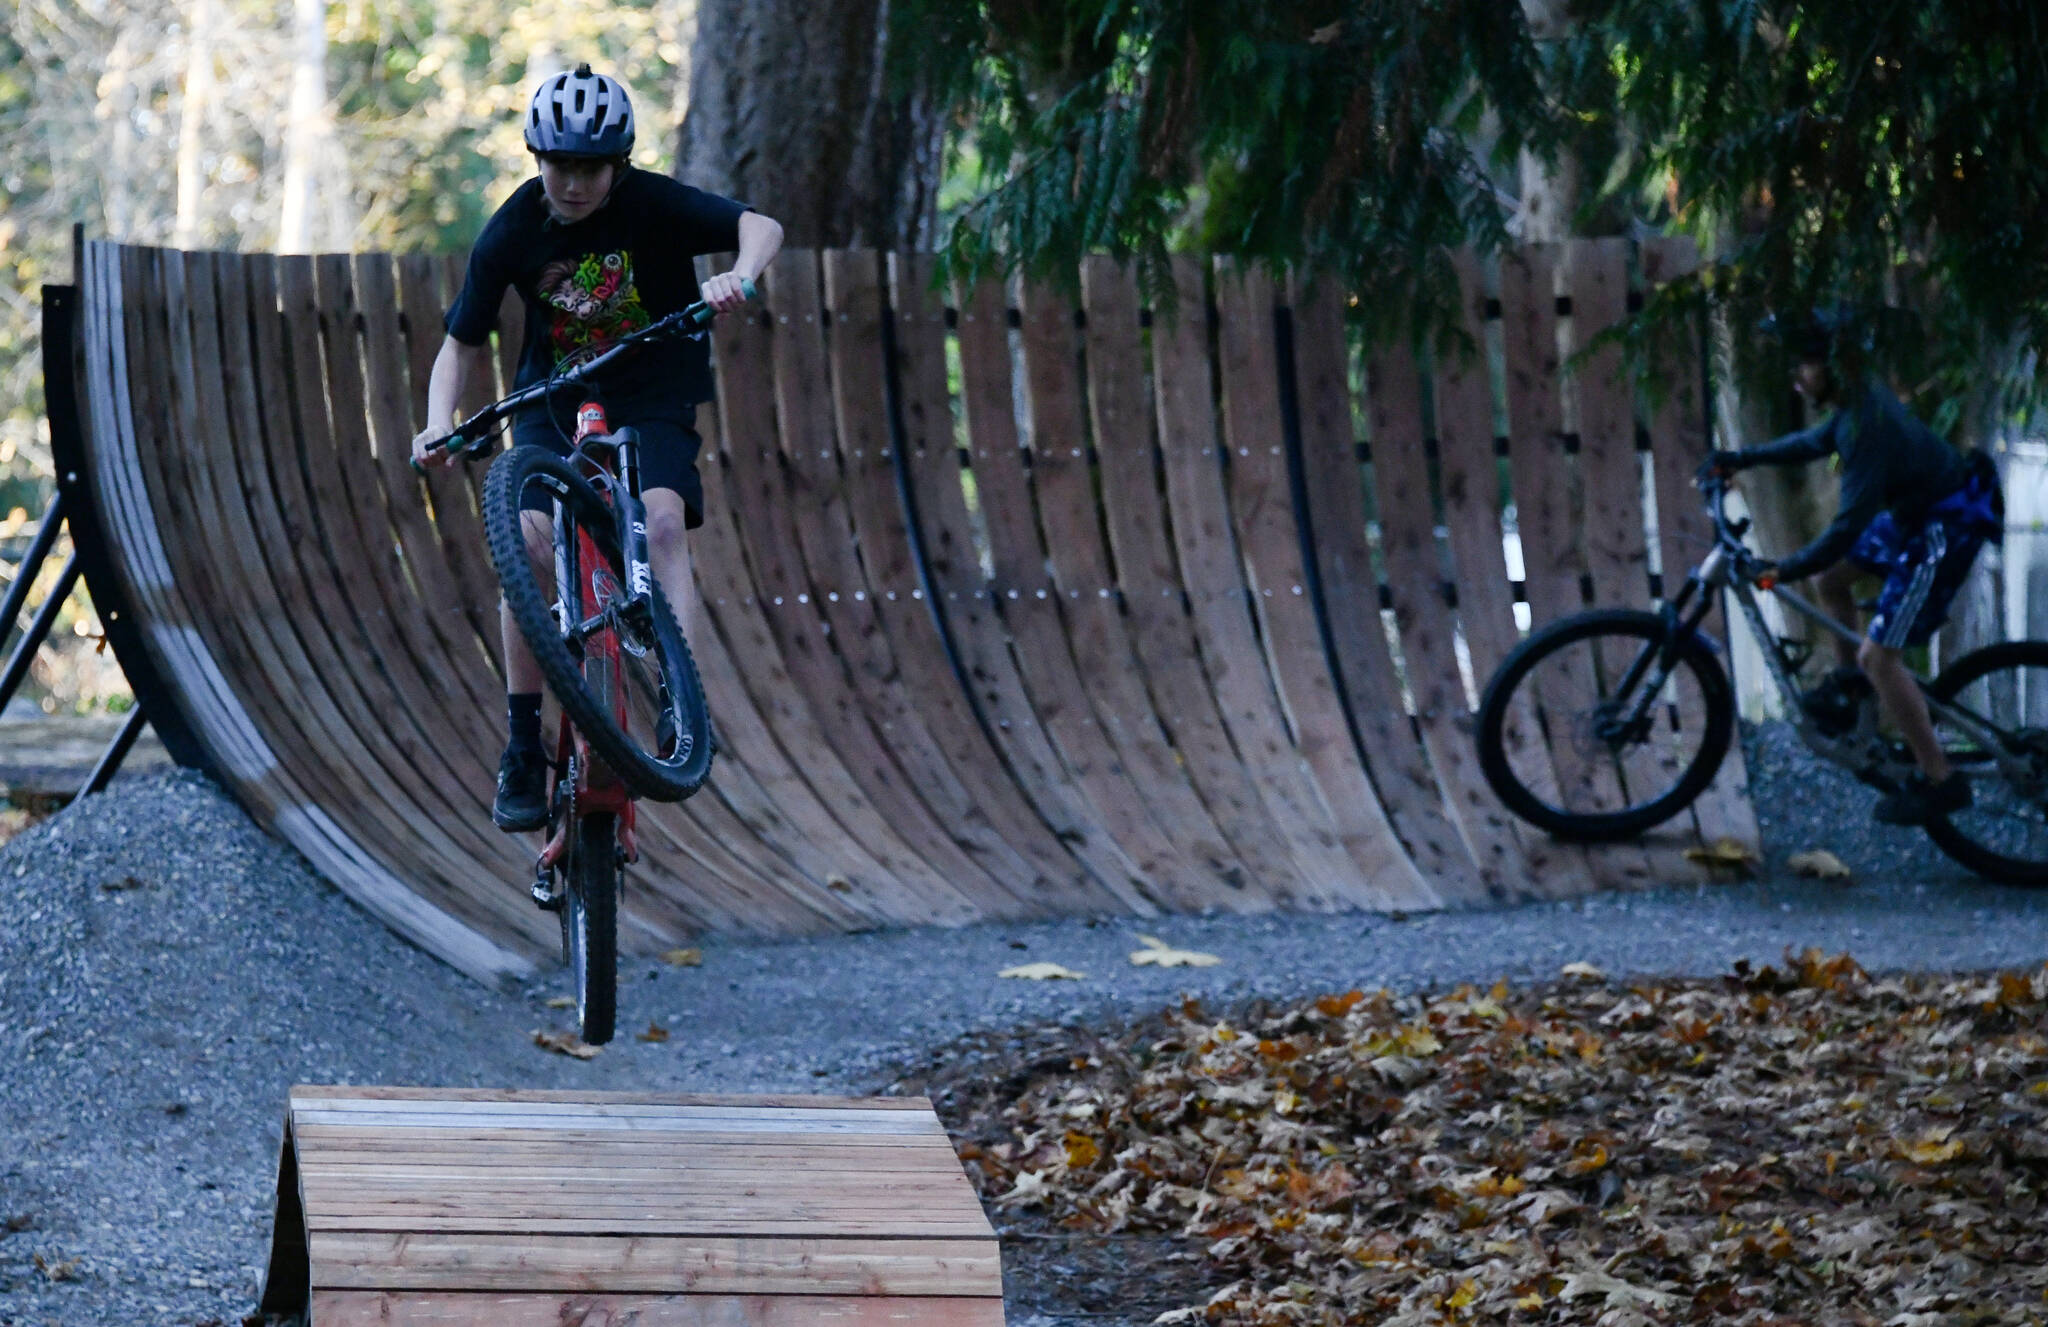 Miles Bailey from the Mercer Island Mountain Bike team gets air while another rider rolls through the new Bike Skills Area, which opened to the public on Nov. 15 at Deane’s Children’s Park. Andy Nystrom/ staff photo